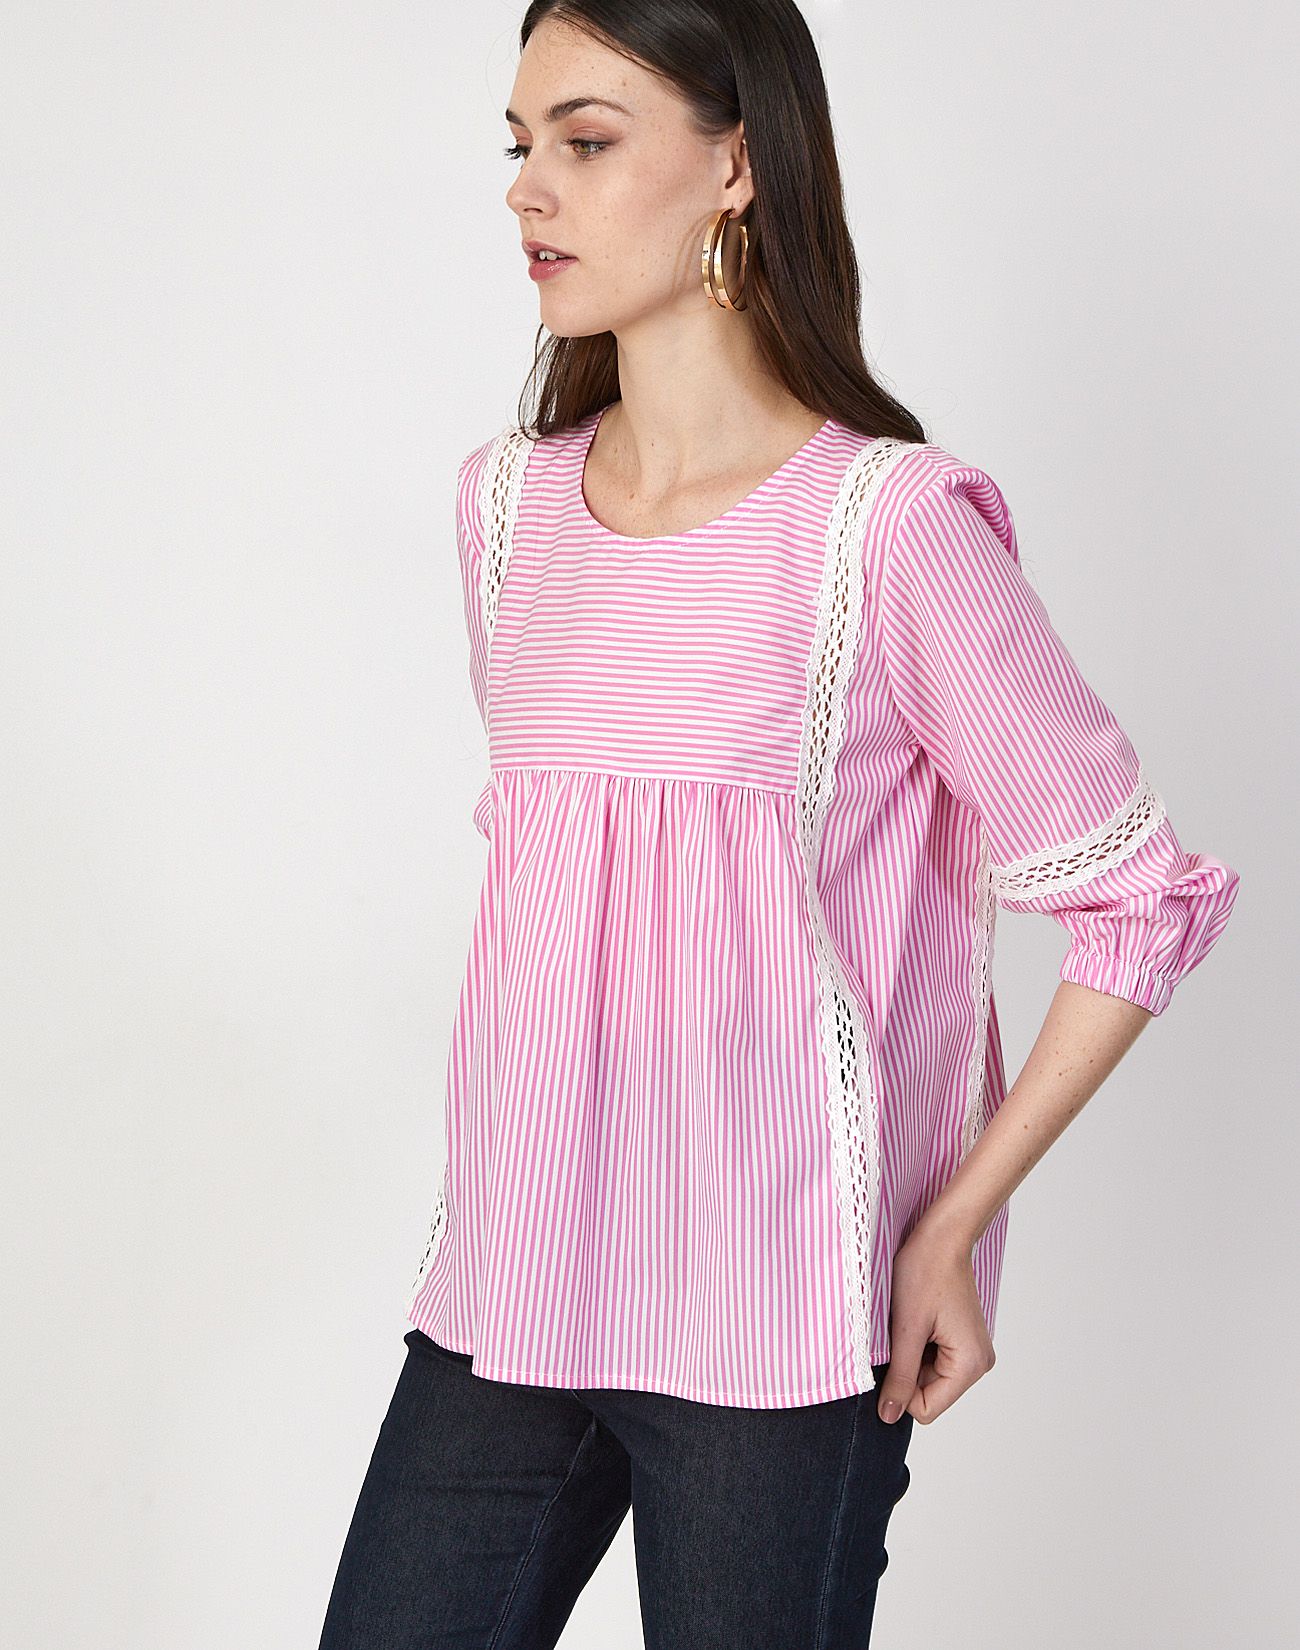 Striped top with lace